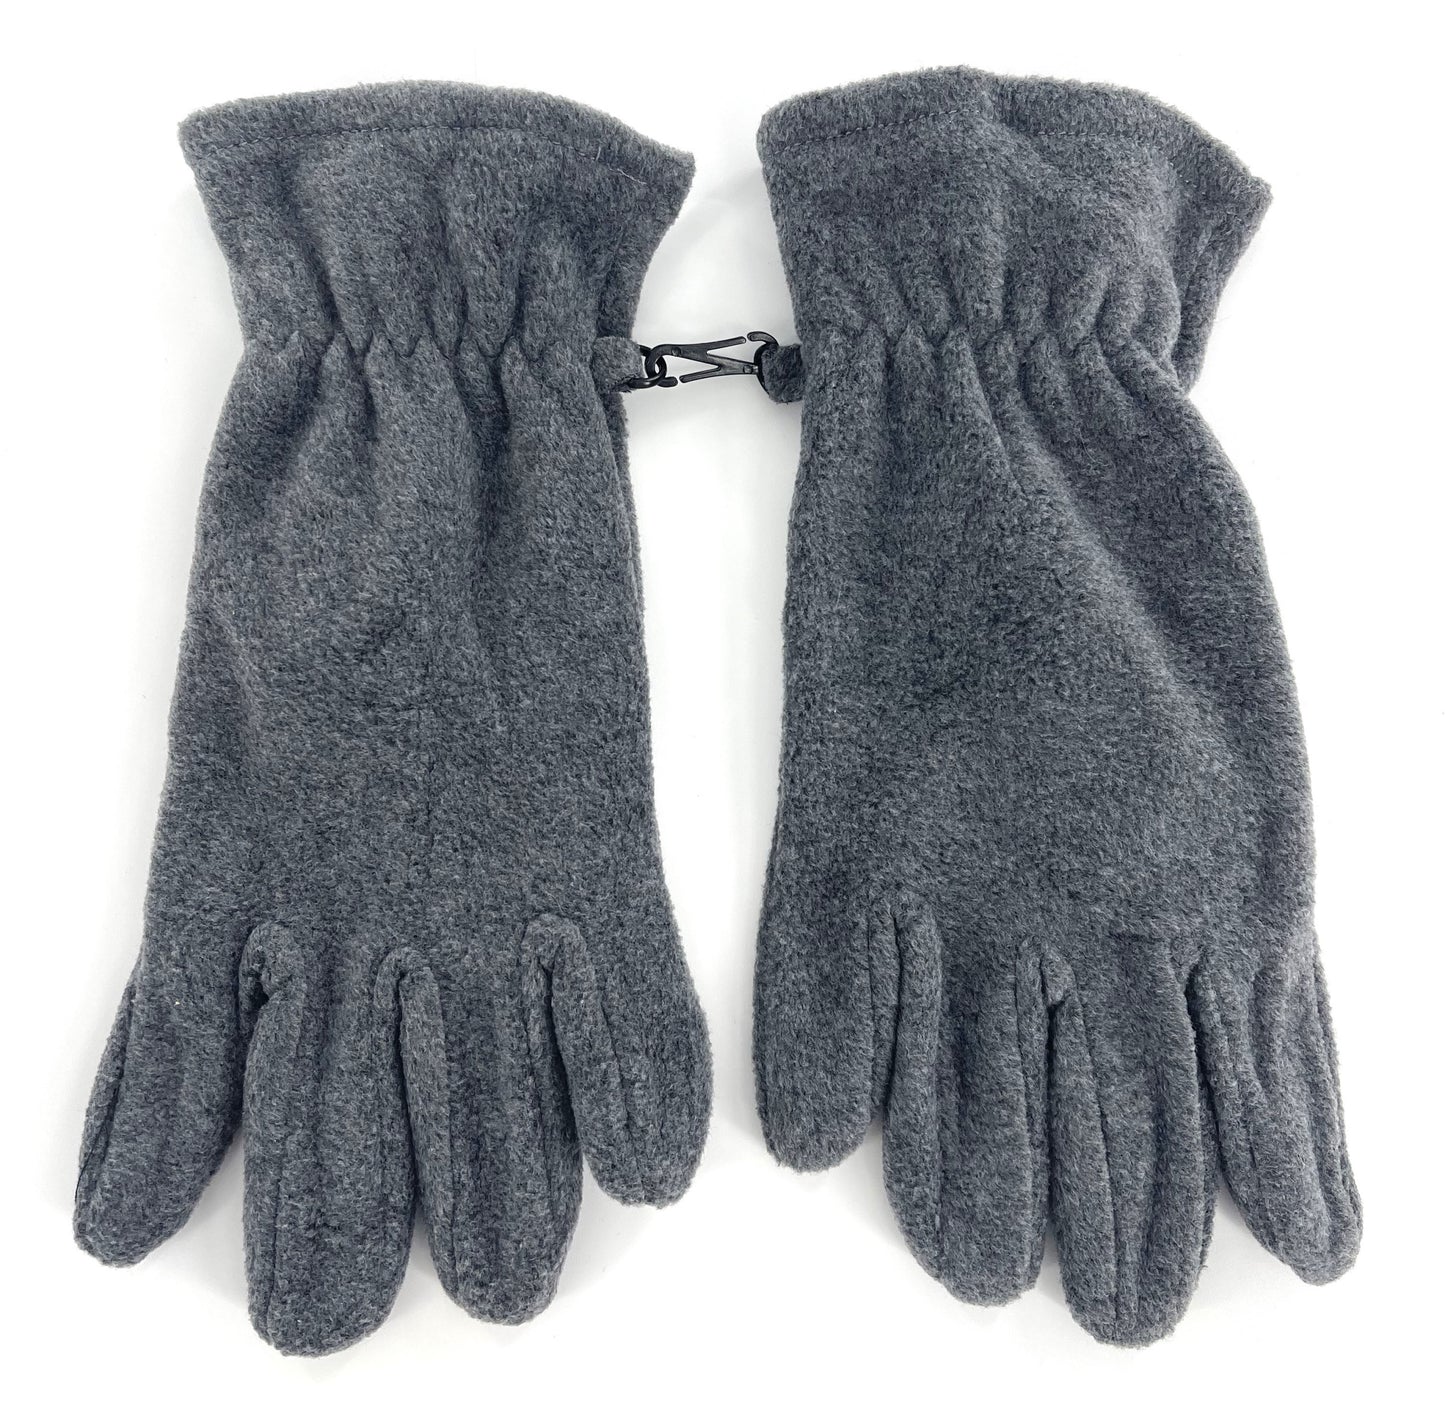 1 Pair Men's Fleece Gloves - One Size Elasticated Wrists Clip Together - Black or Grey